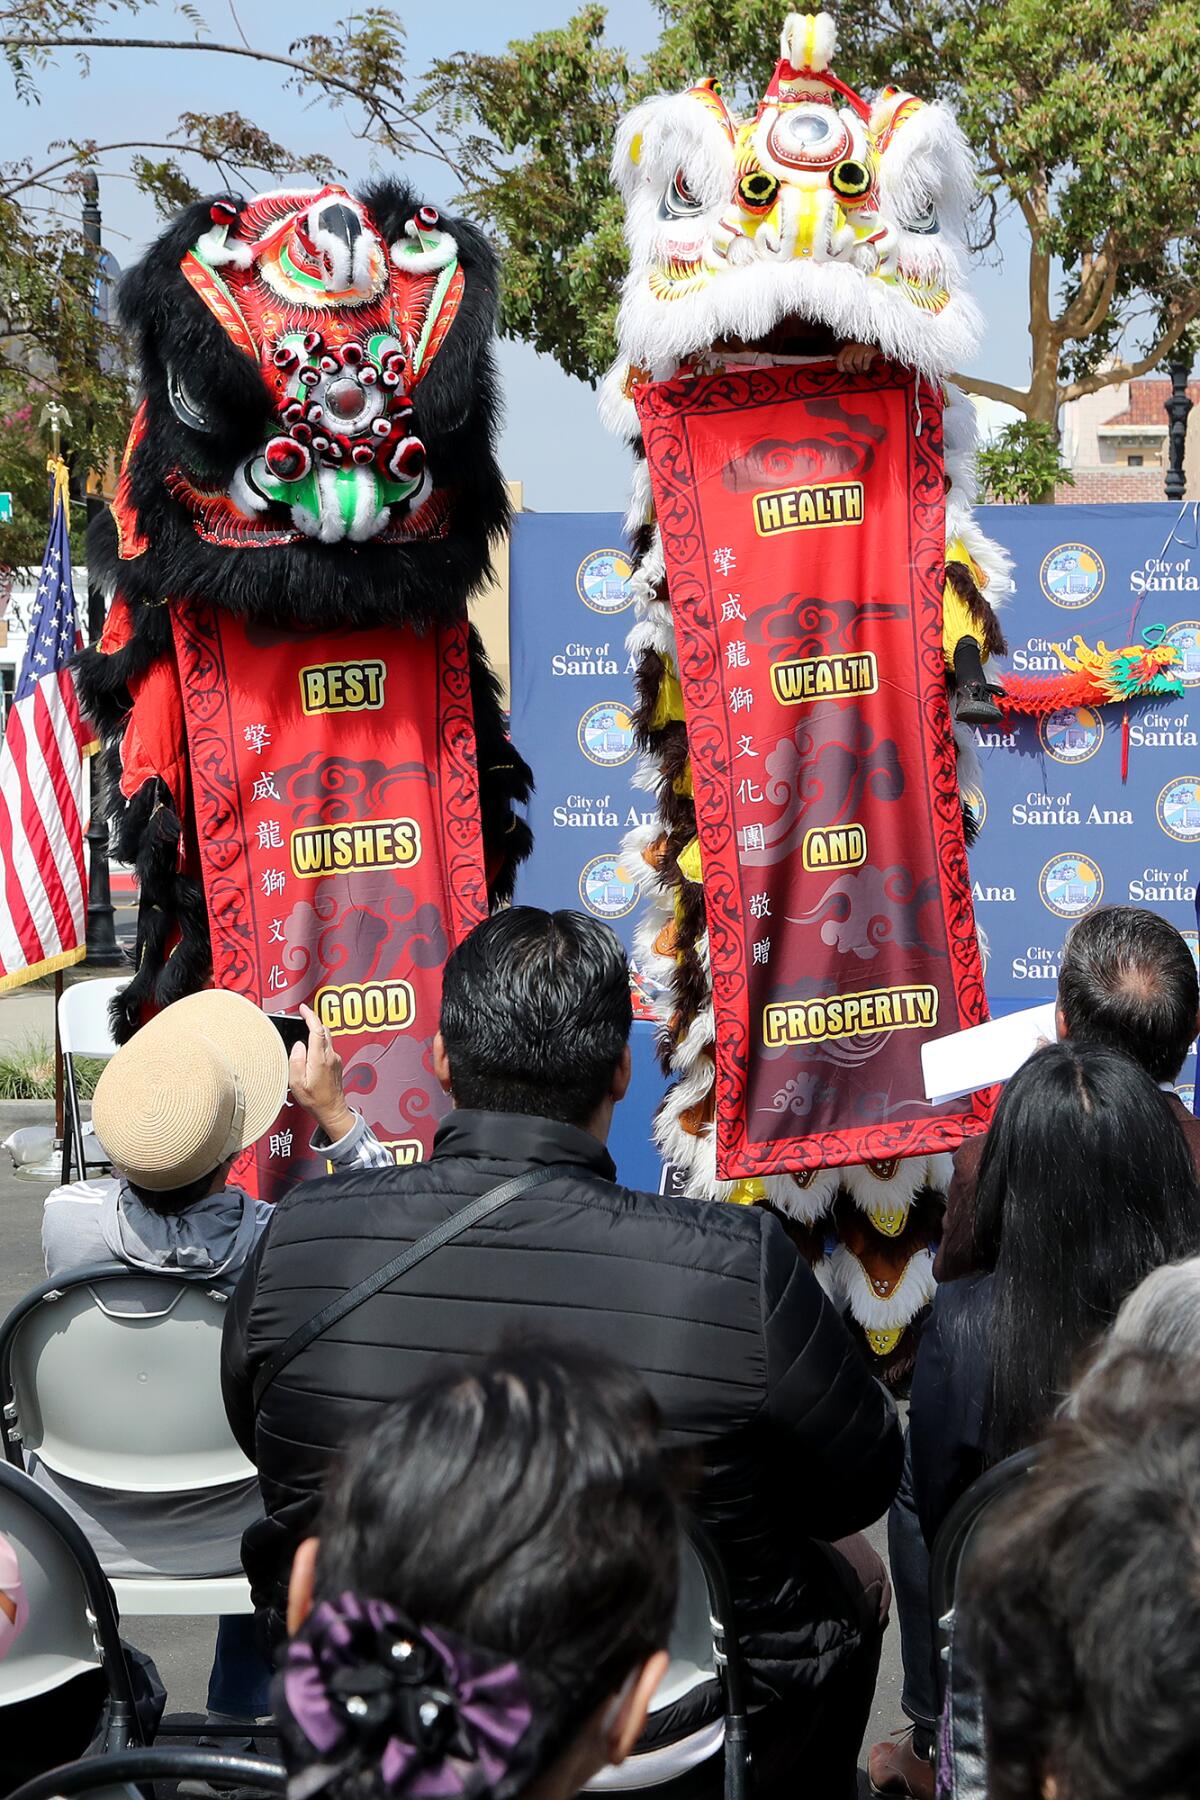 Guests watch a lion dance performance during a ceremony marking the signing of an official Chinatown apology.